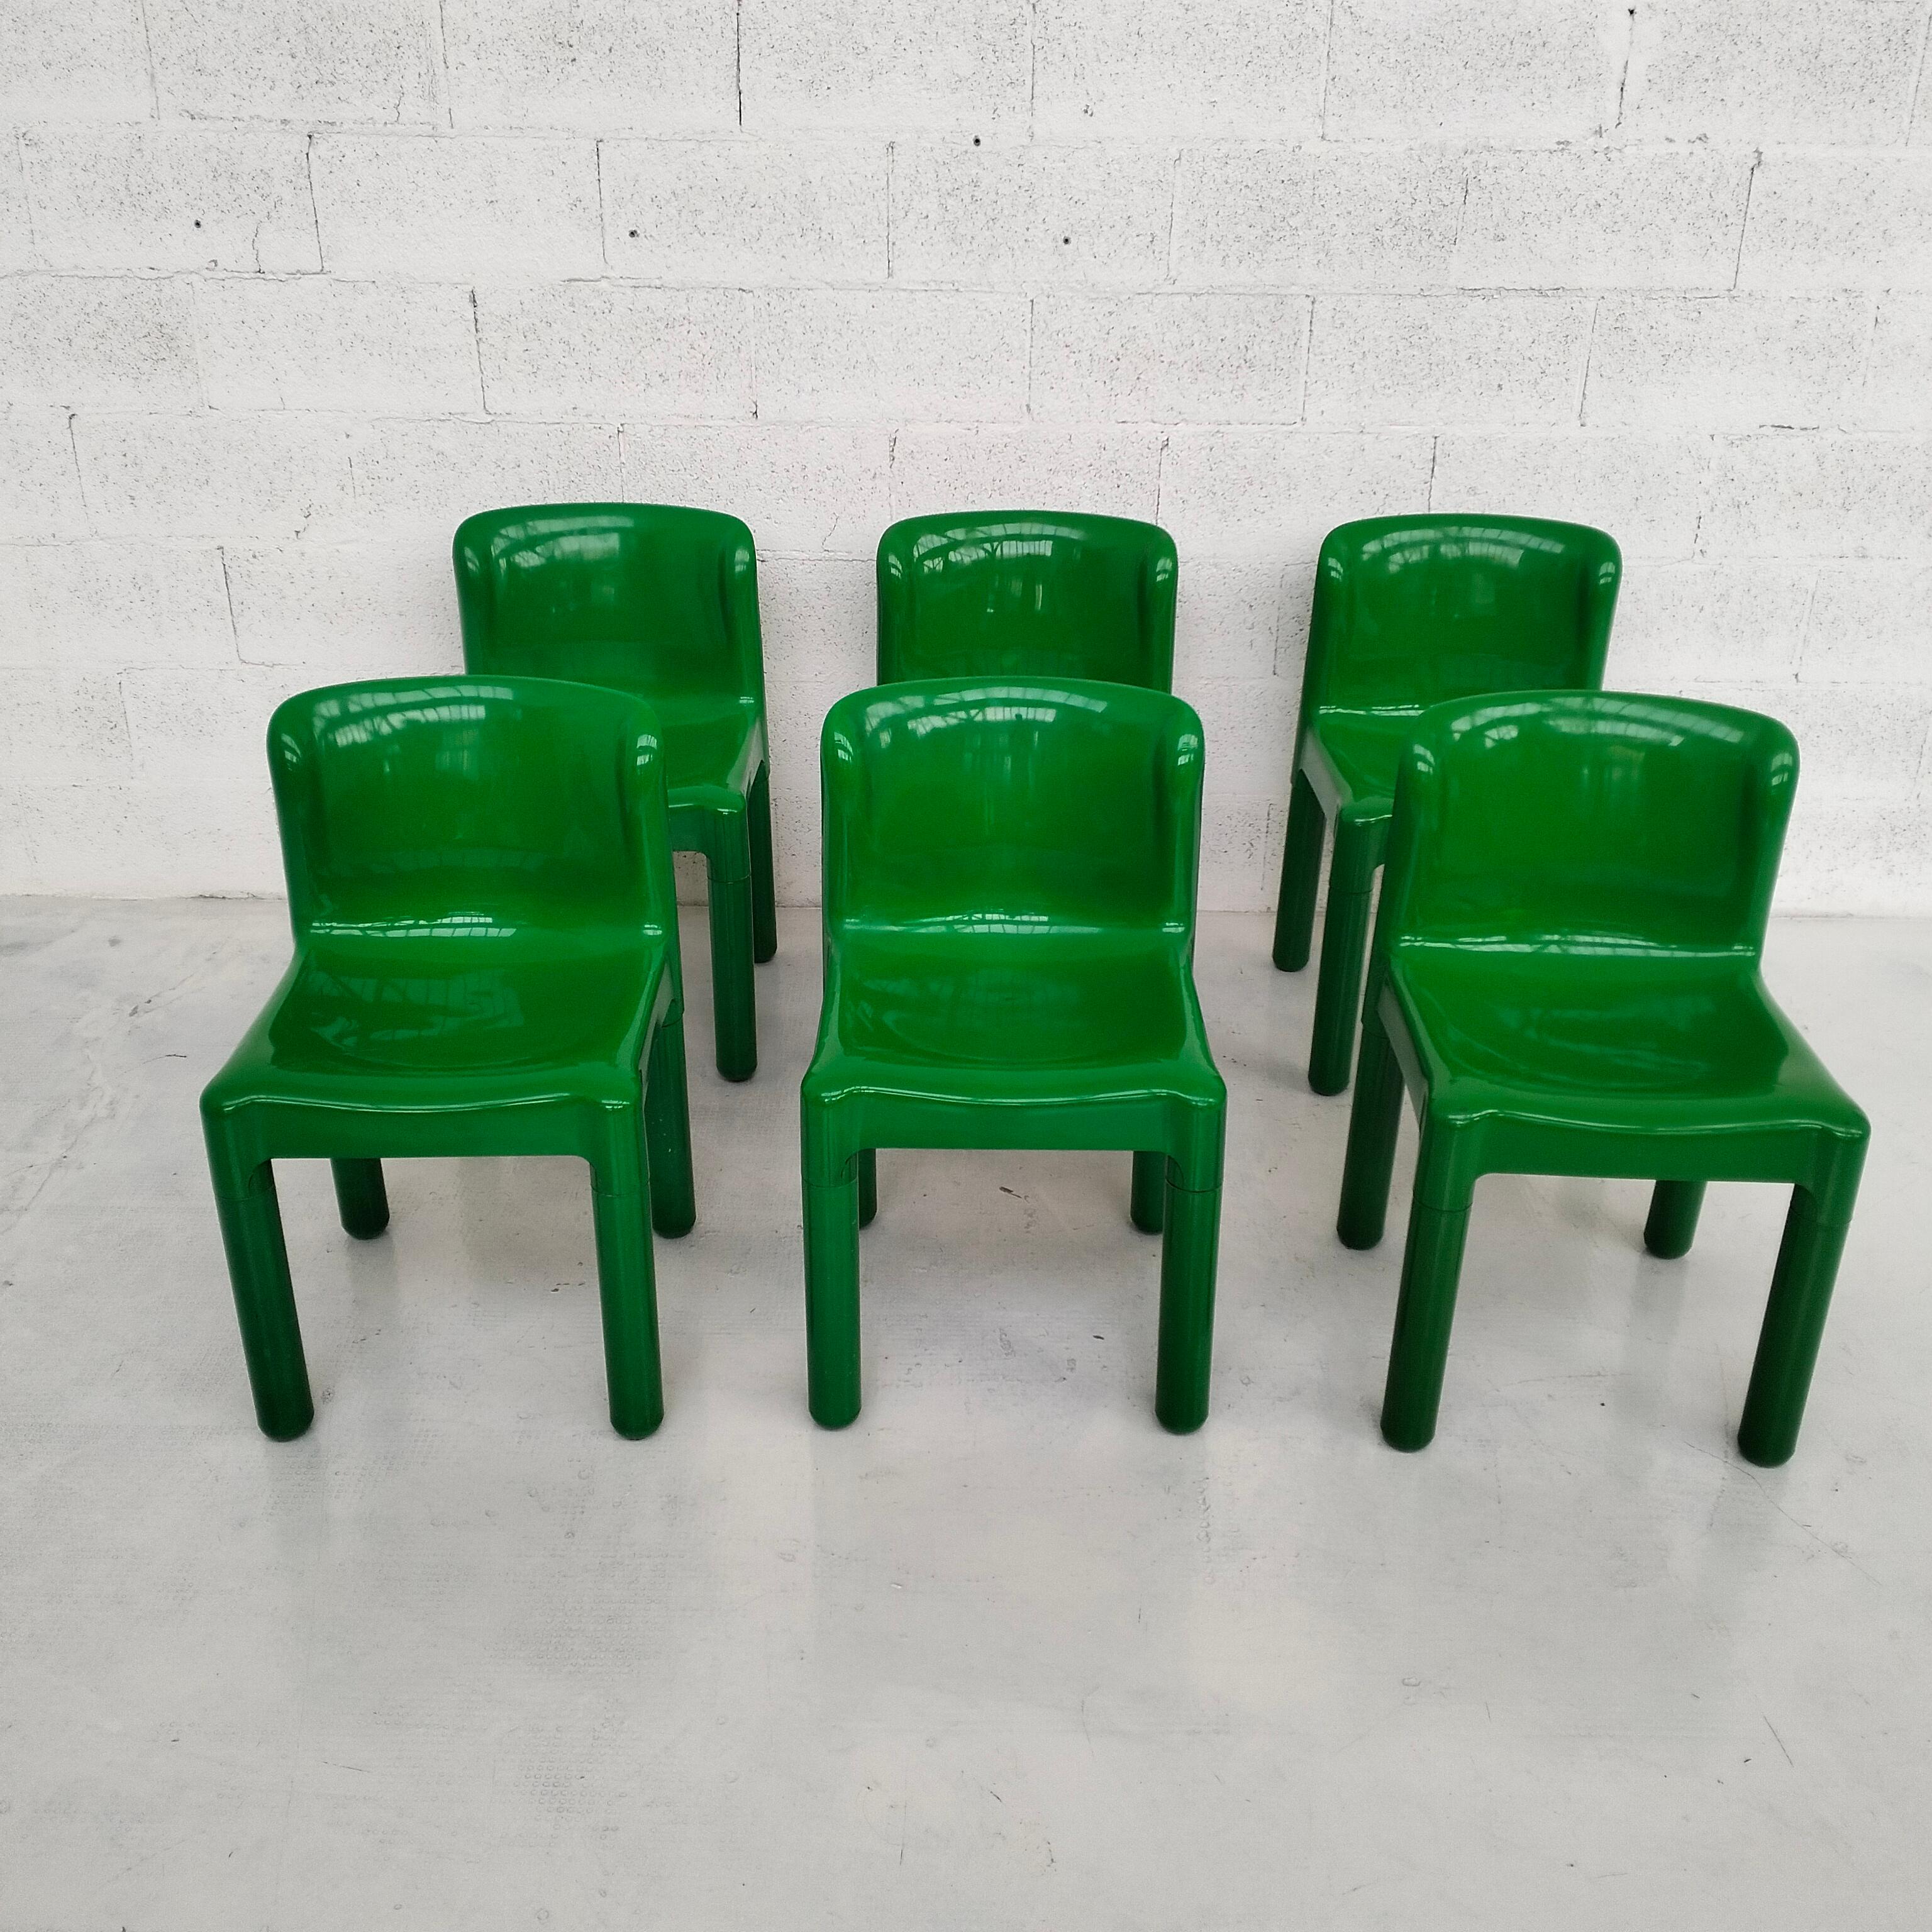 Mid-Century Modern Green Plastic Chairs 4875 by Carlo Bartoli for Kartell 1970s, Set of 6